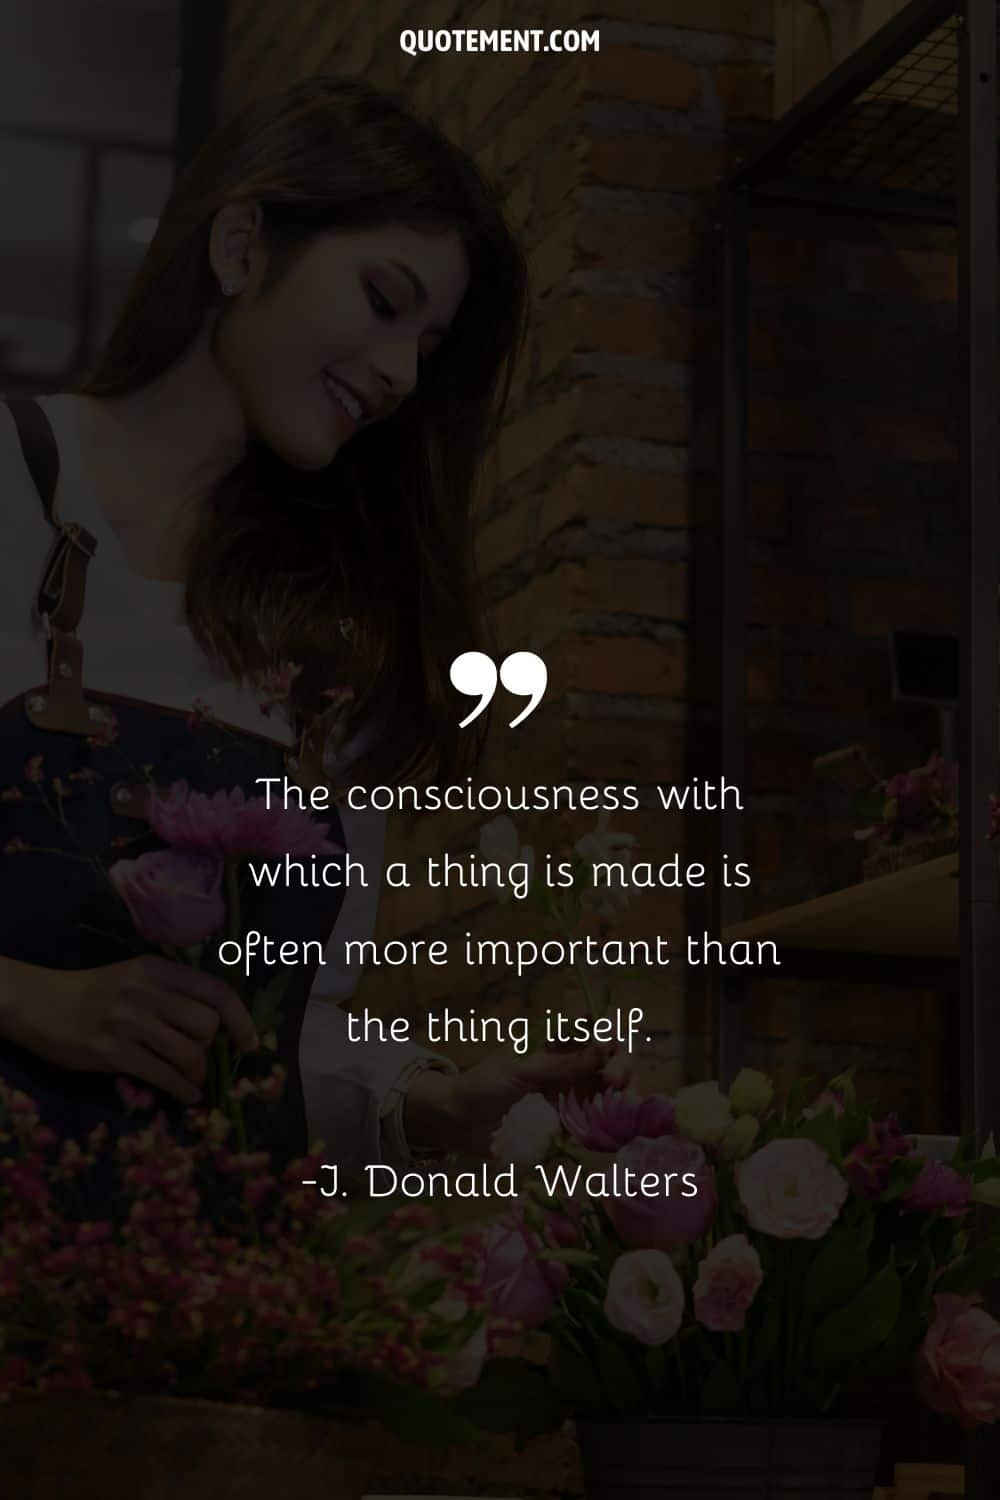 The consciousness with which a thing is made is often more important than the thing itself